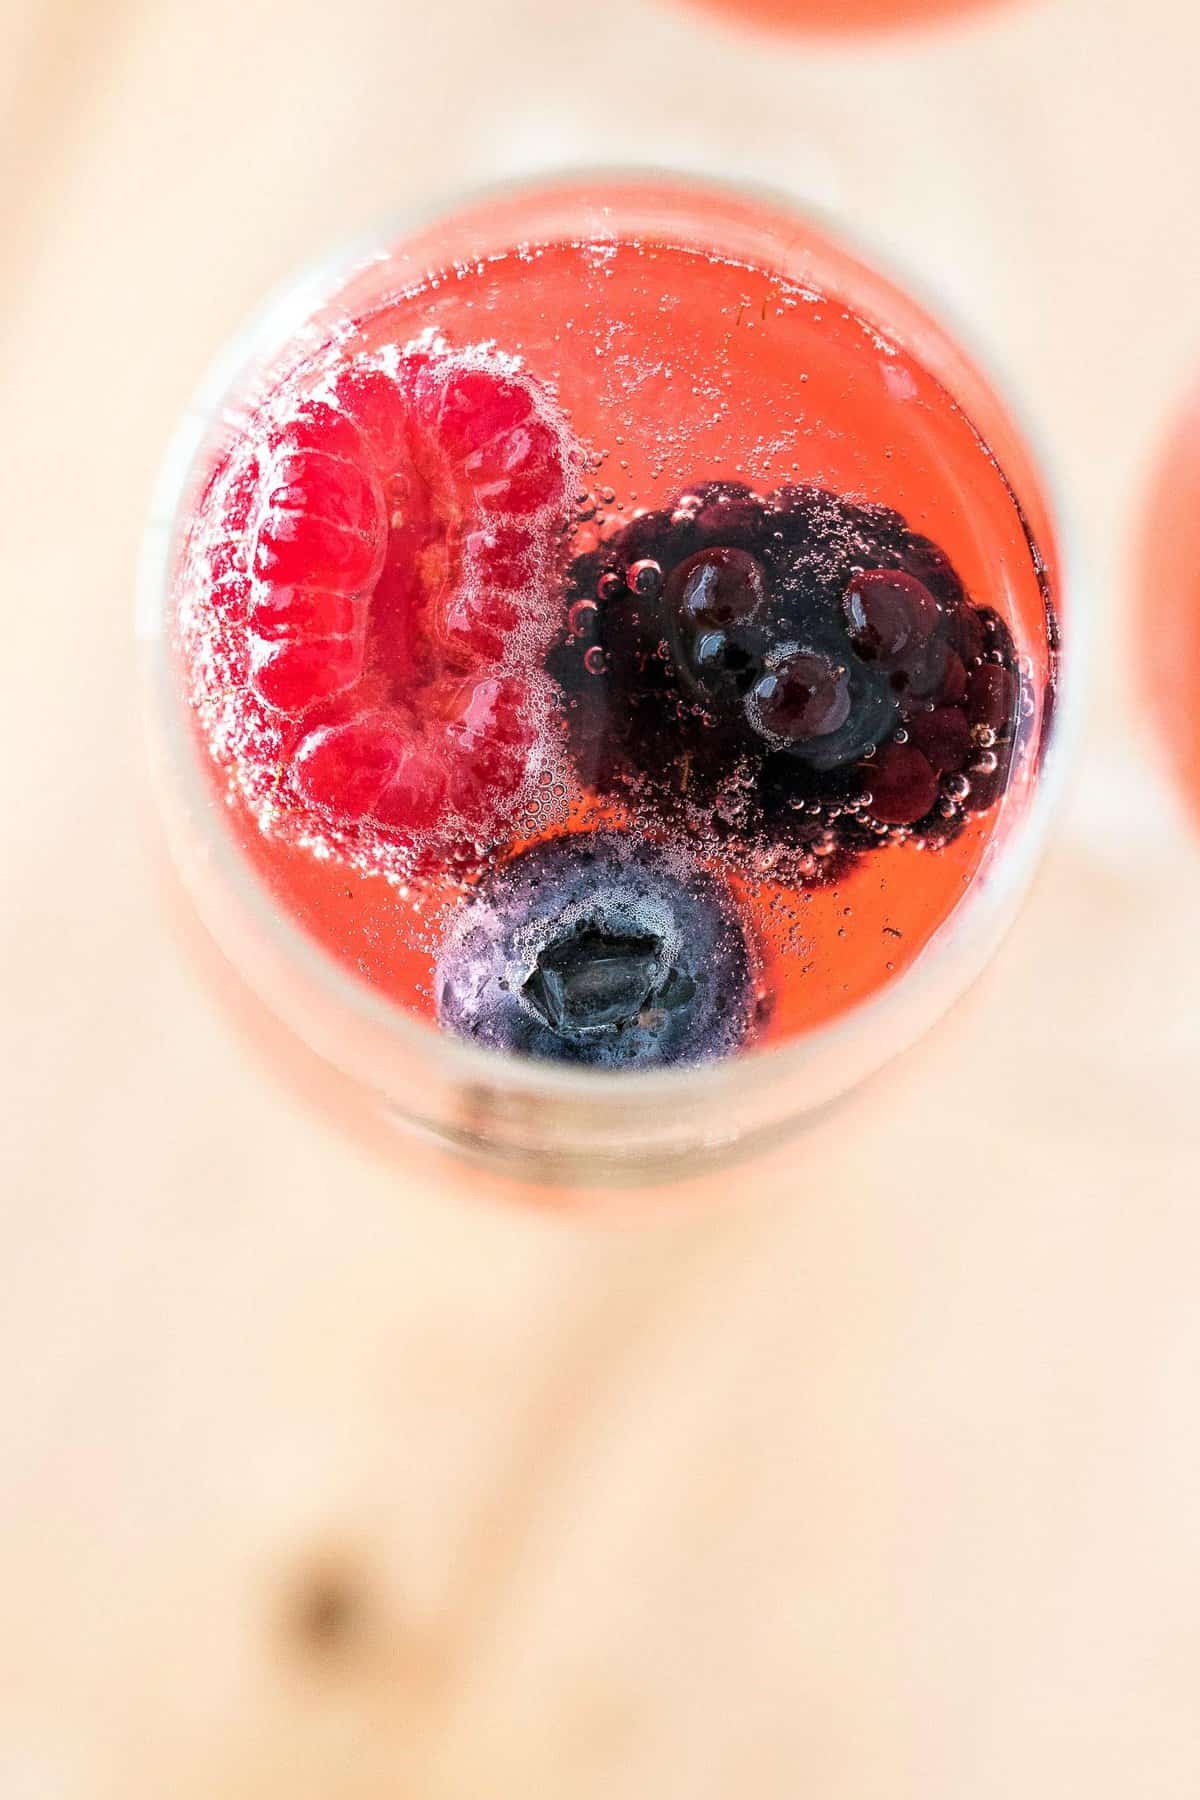  Just add berries, bubbly, and a little bit of sunshine!